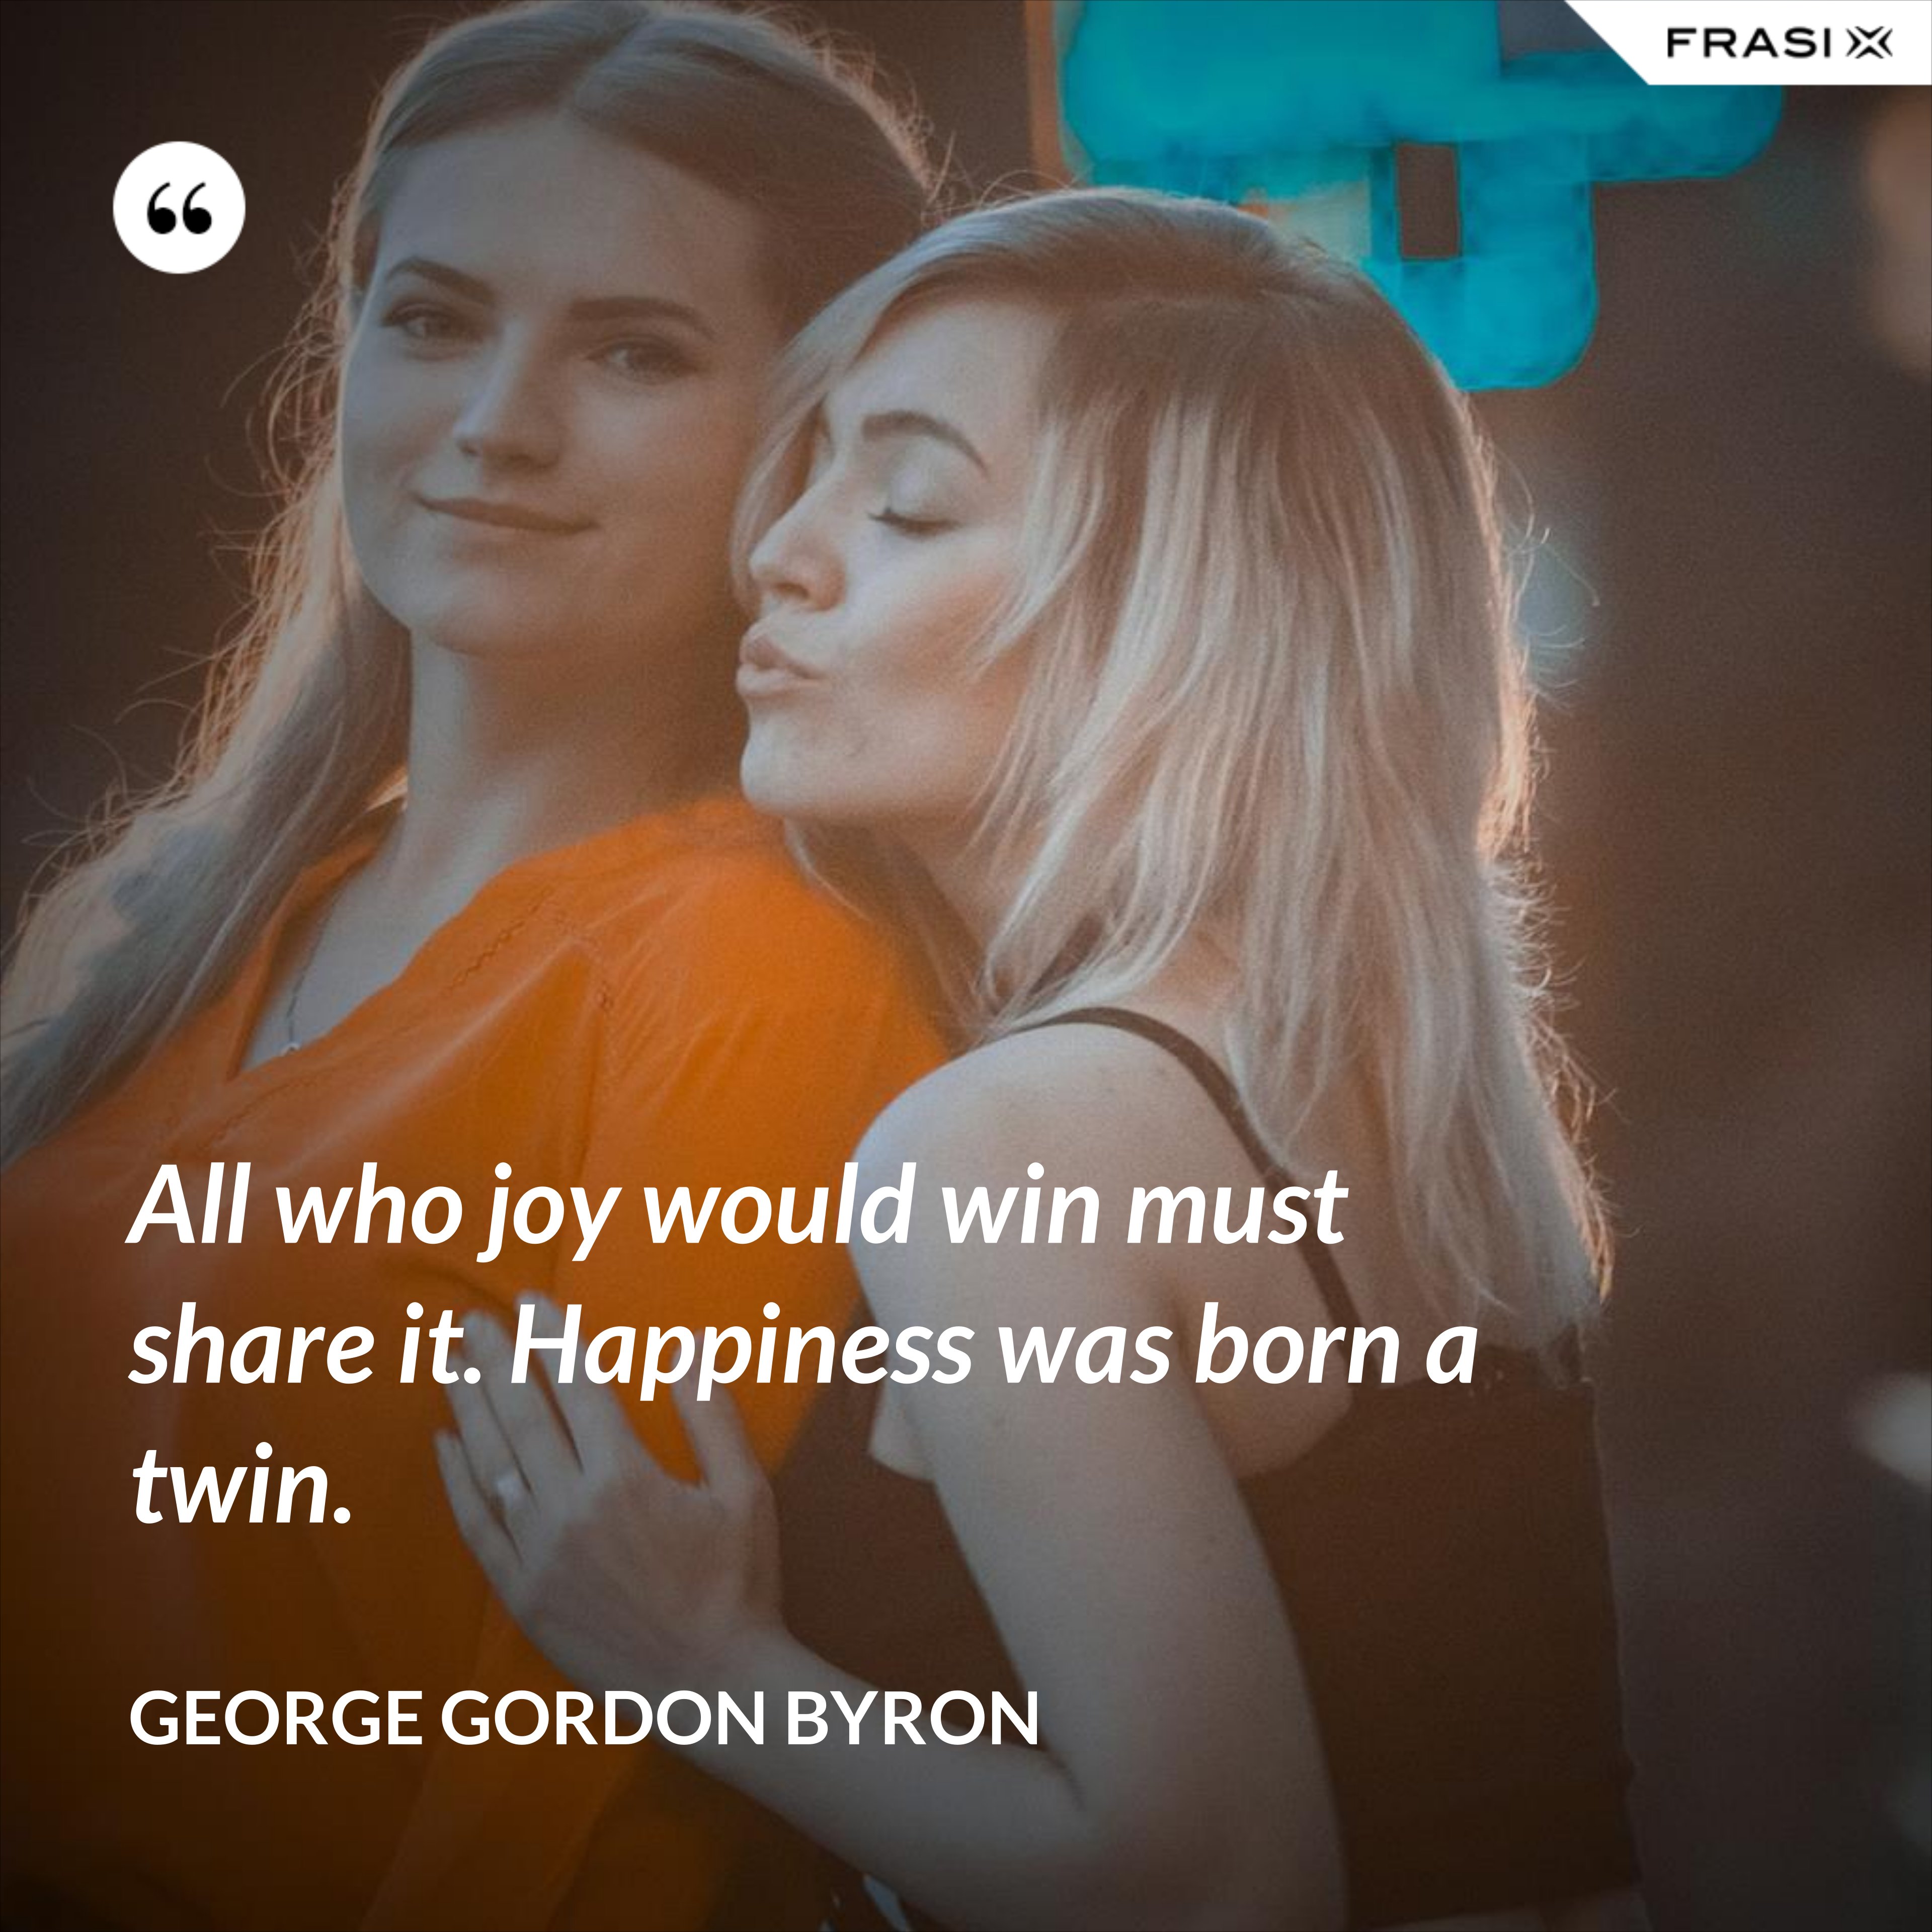 All who joy would win must share it. Happiness was born a twin. - George Gordon Byron